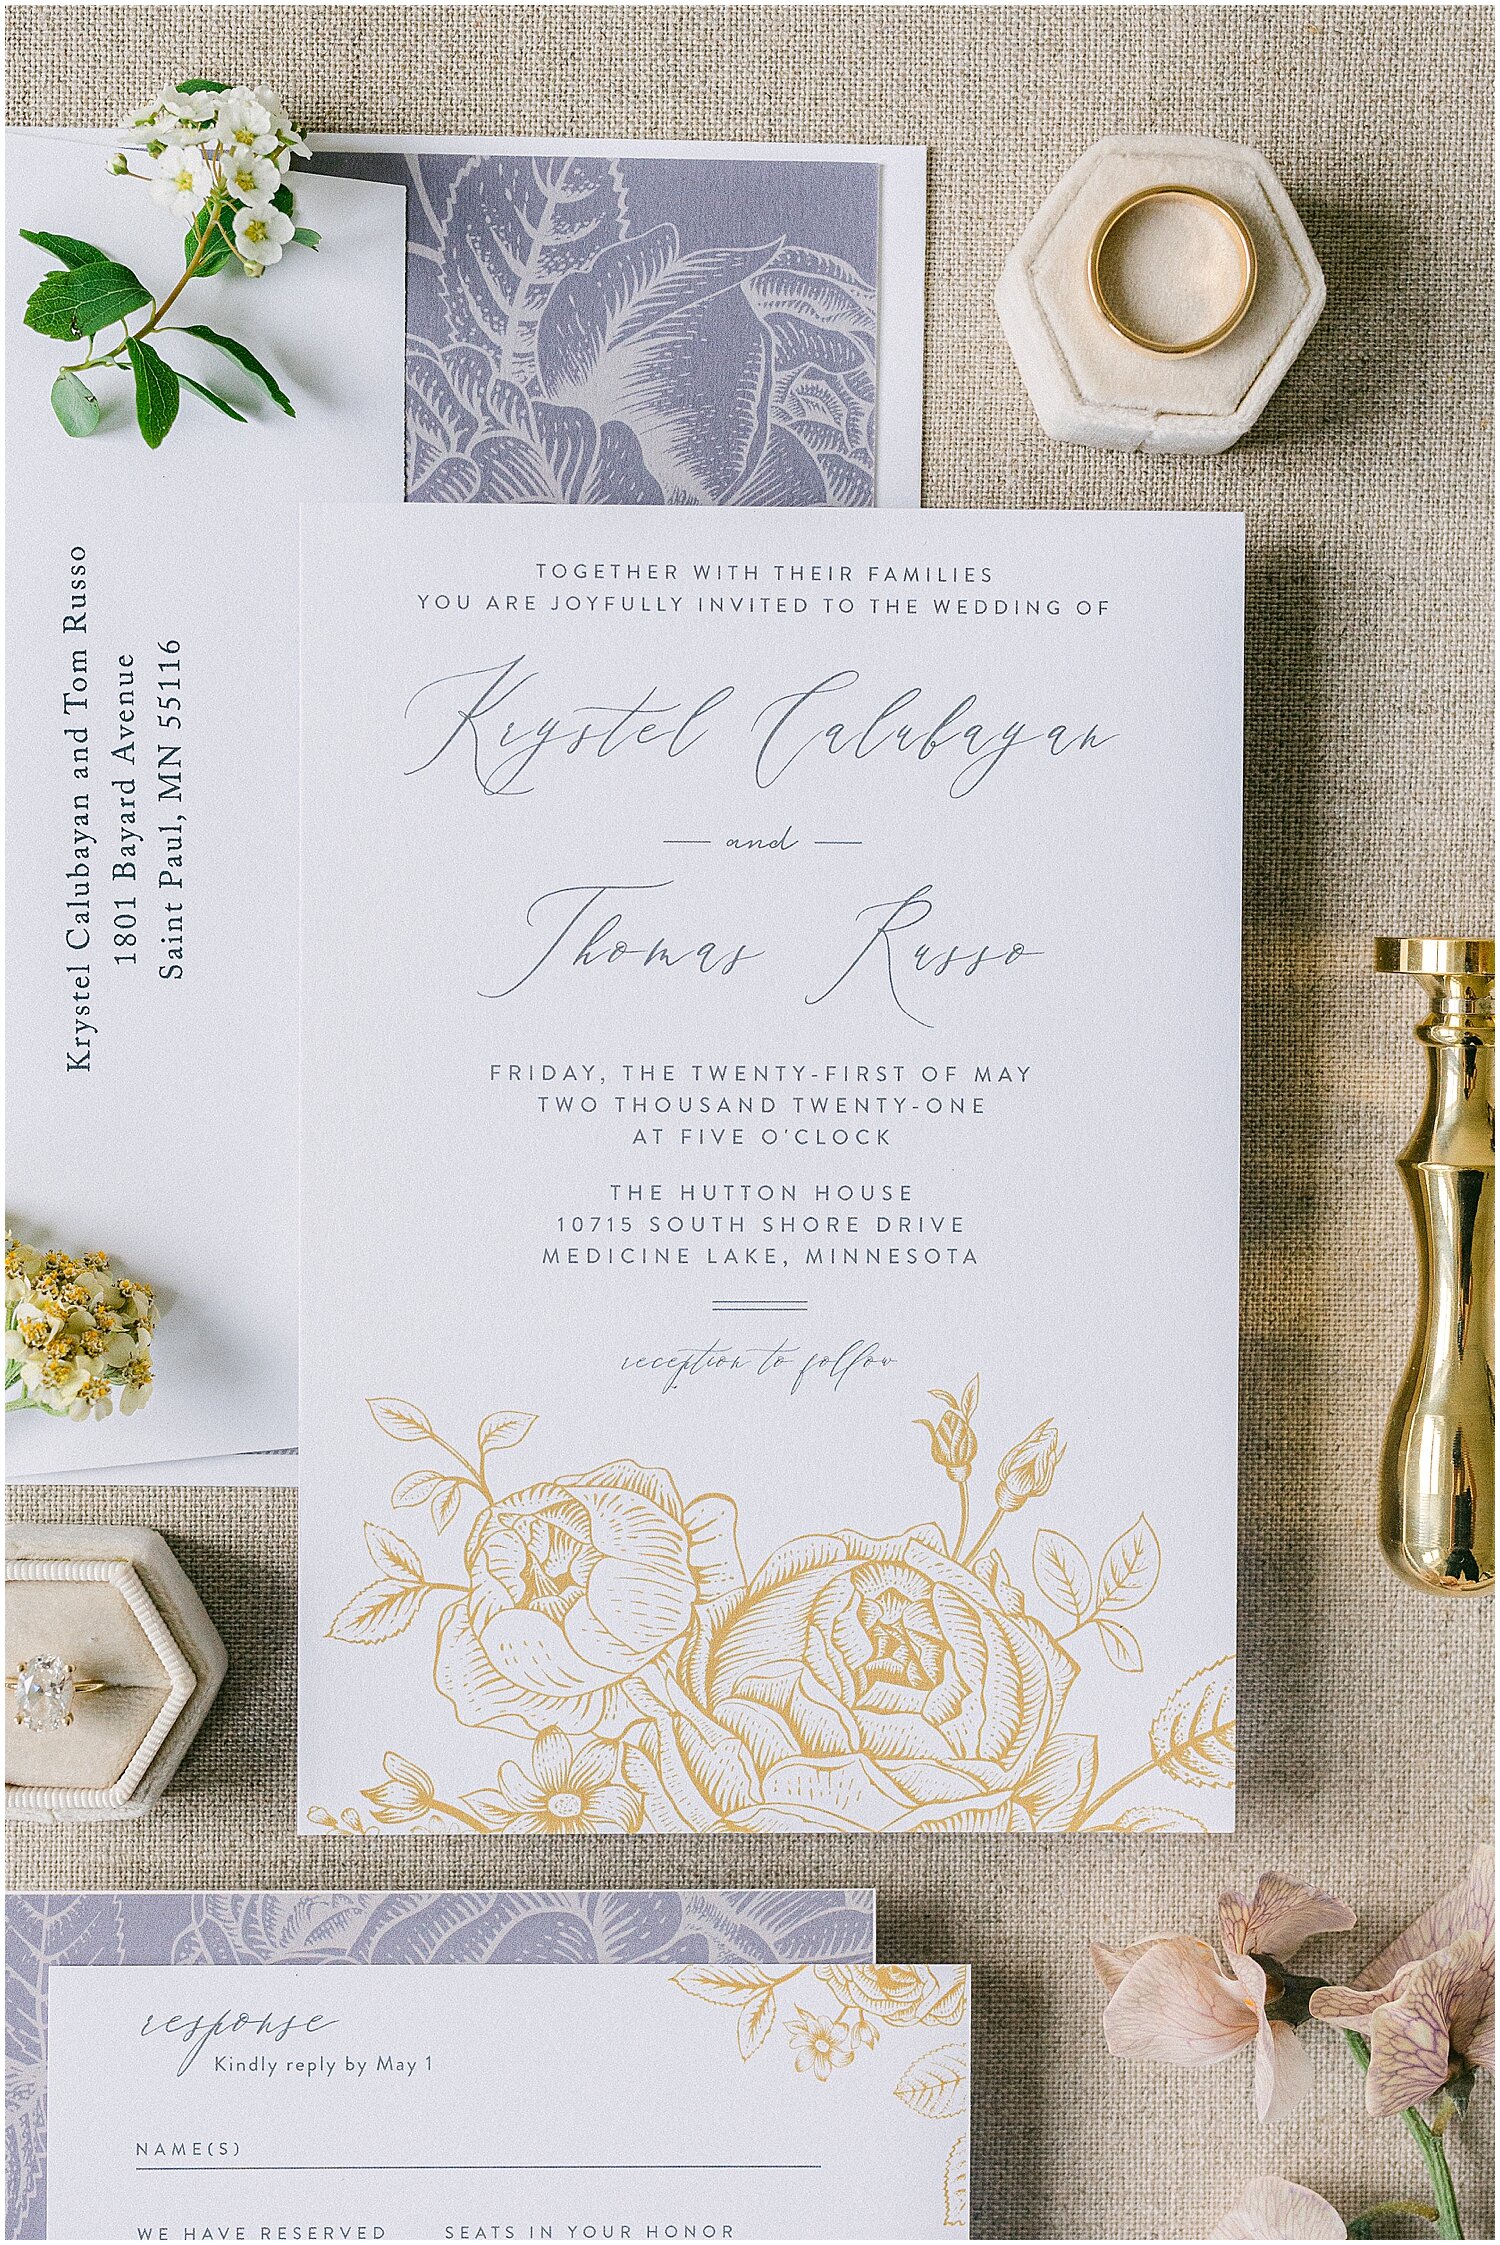  wedding invitation and rings layout 